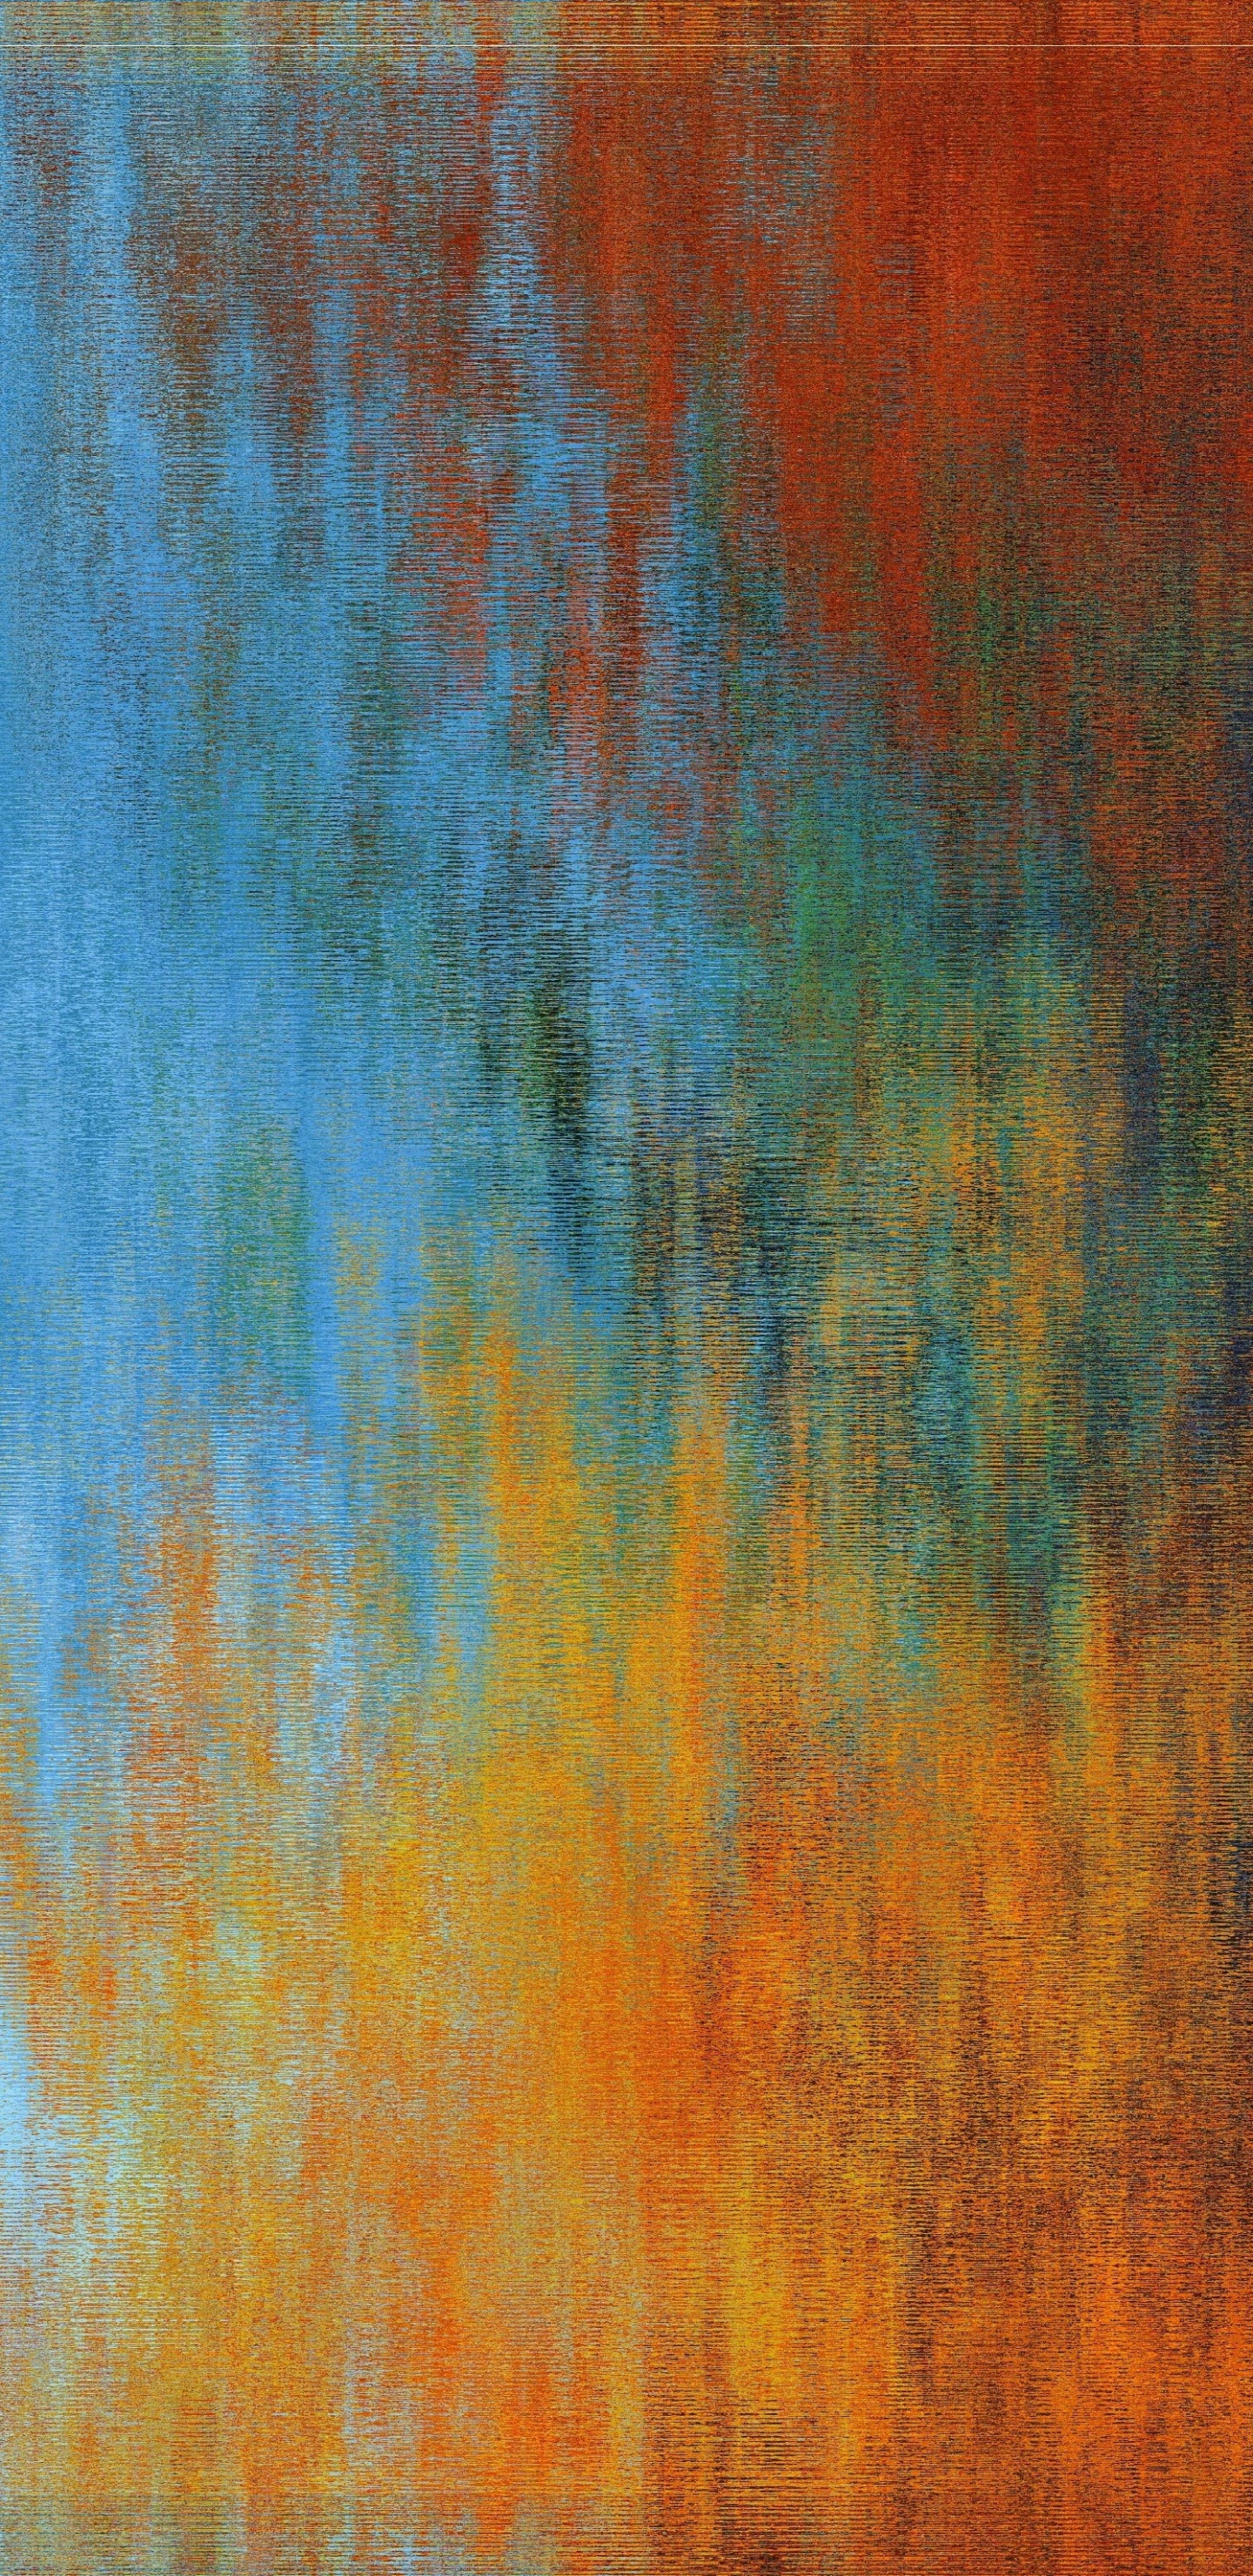 Blue Brown and Green Abstract Painting. Wallpaper in 1440x2960 Resolution